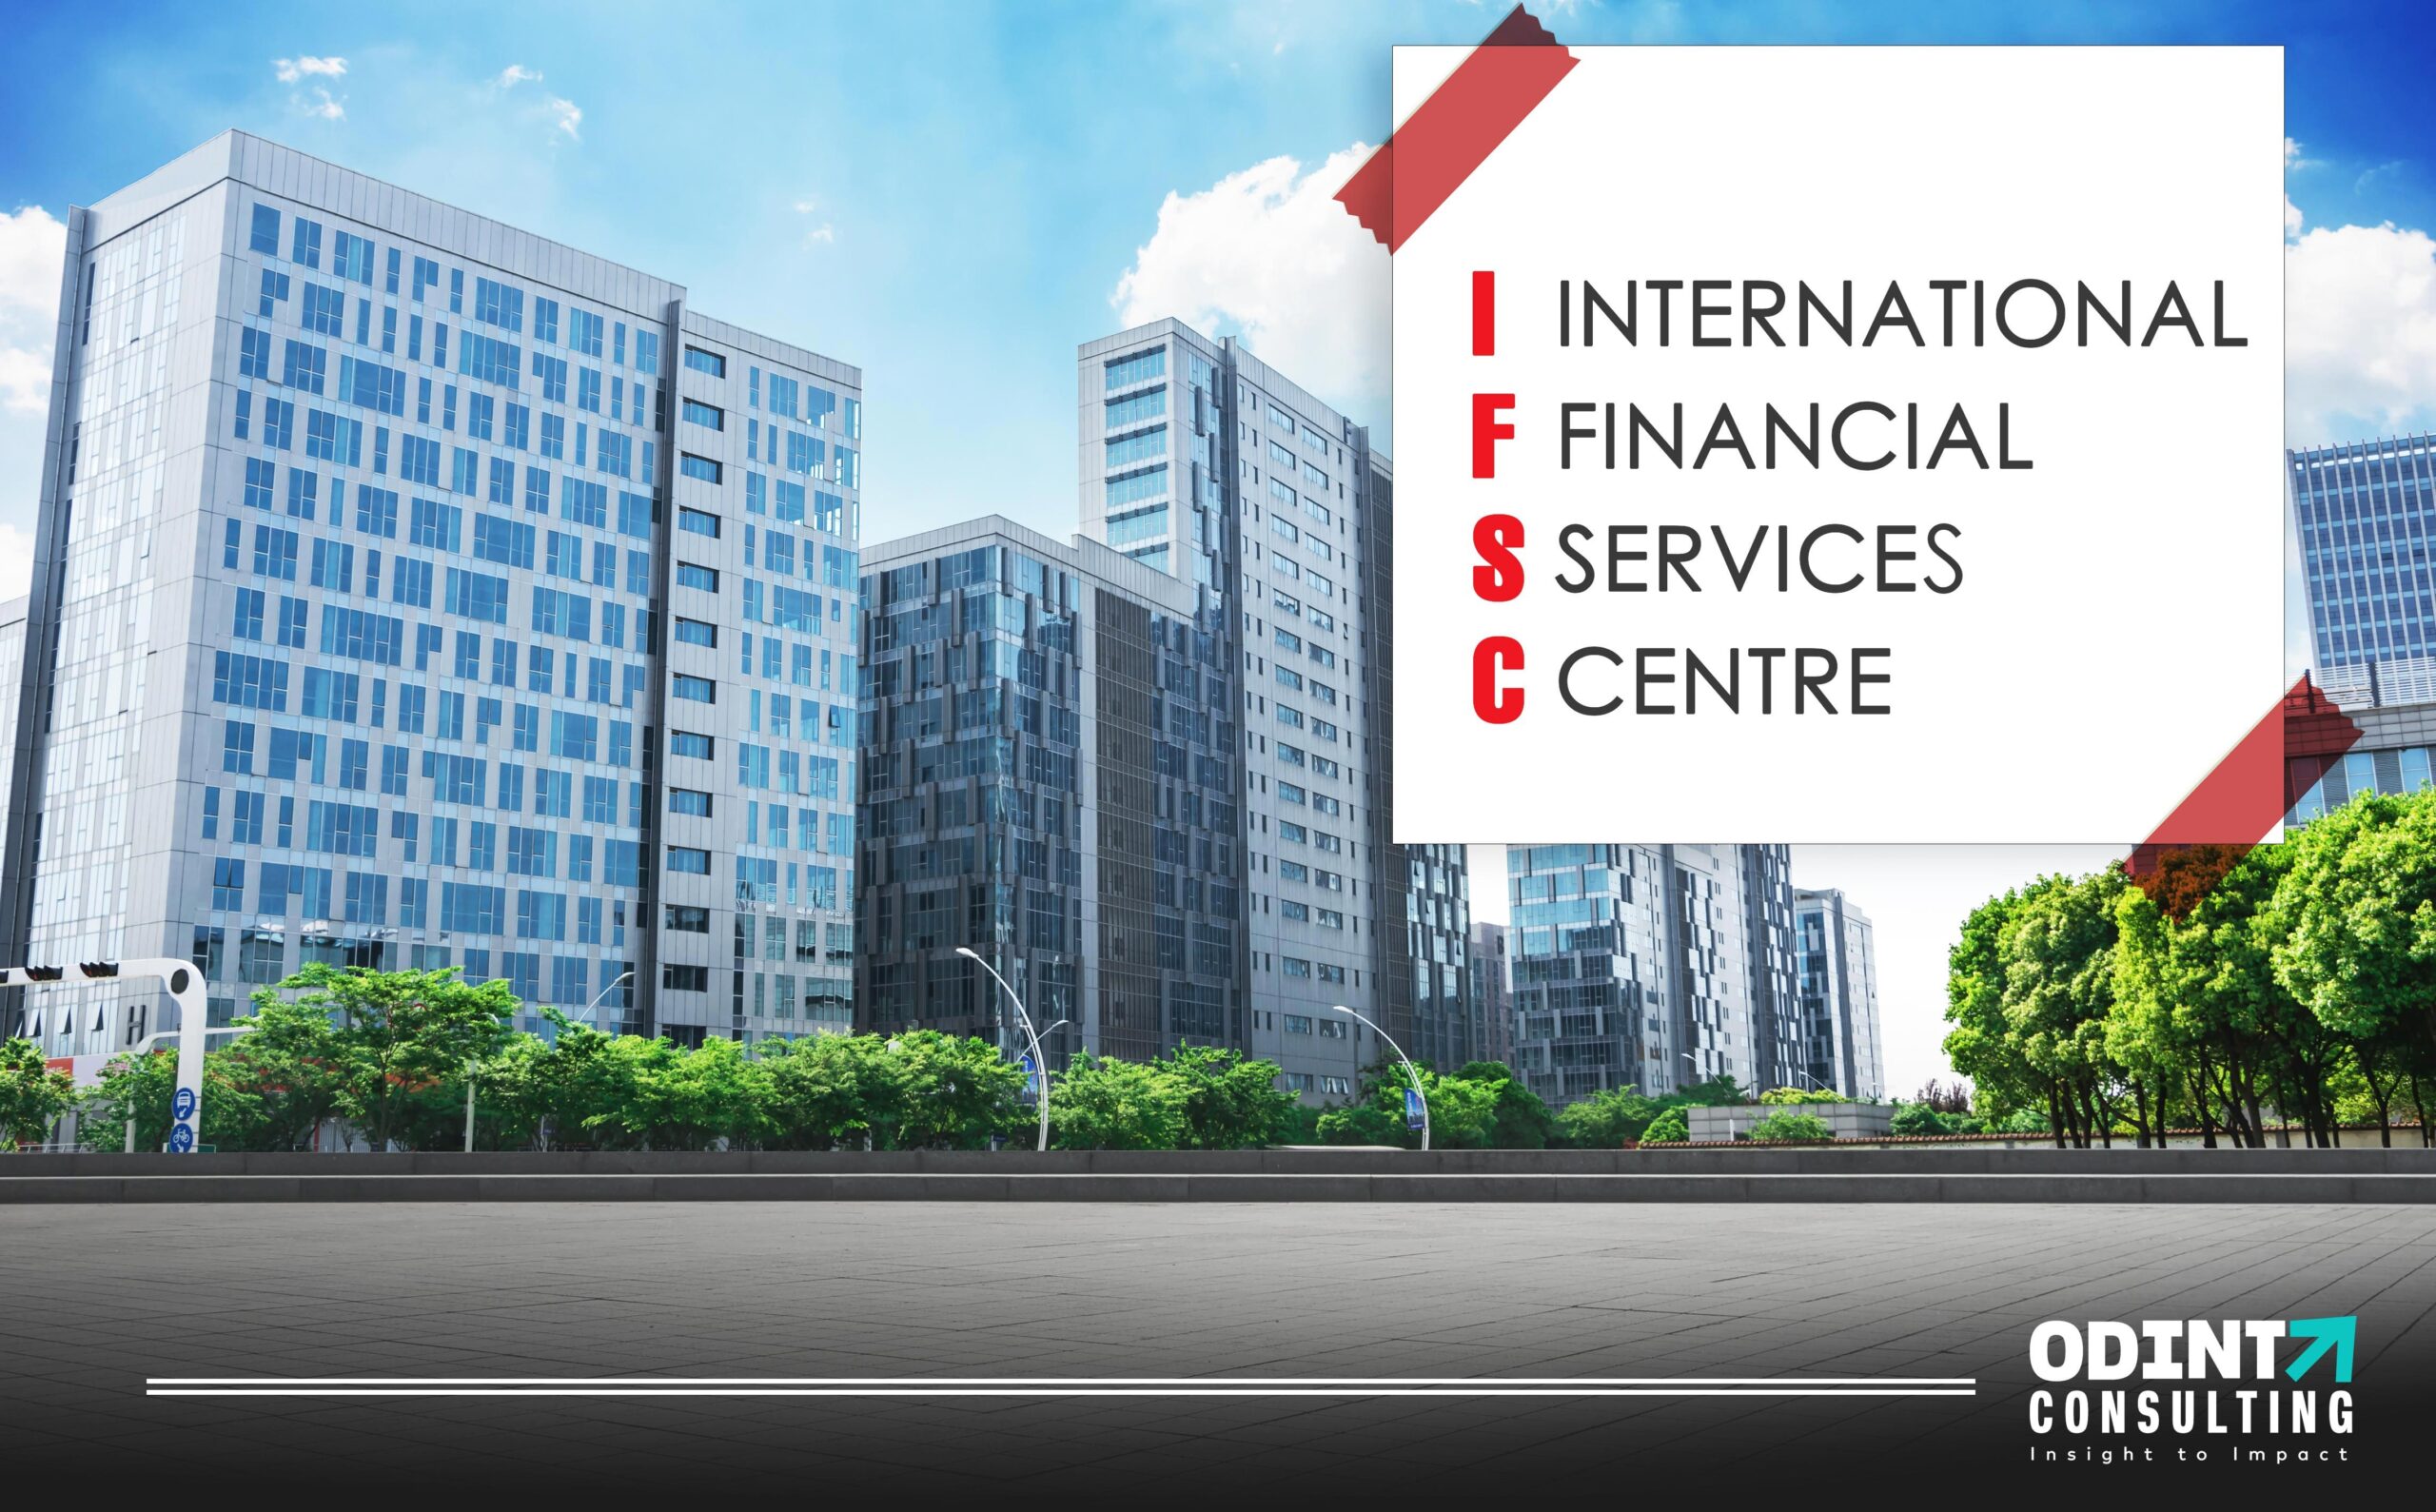 International Financial Services Centre: Purpose, Functions & Regulatory Authority